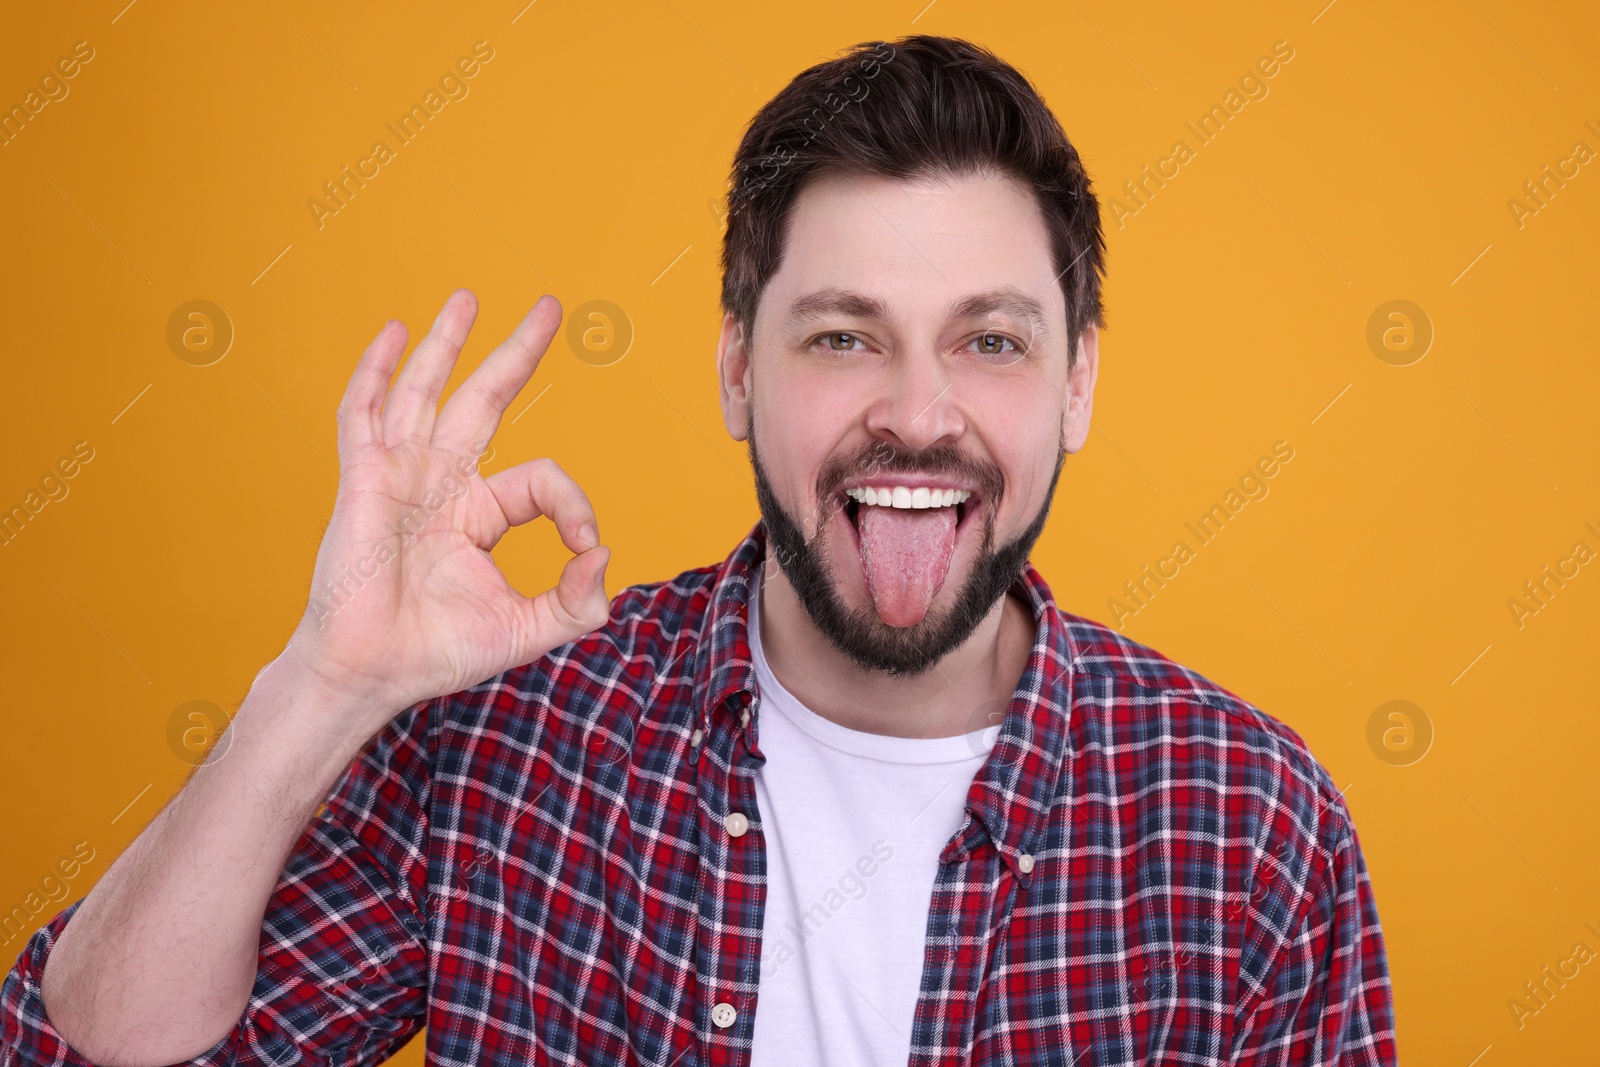 Photo of Happy man showing his tongue and making ok gesture on orange background